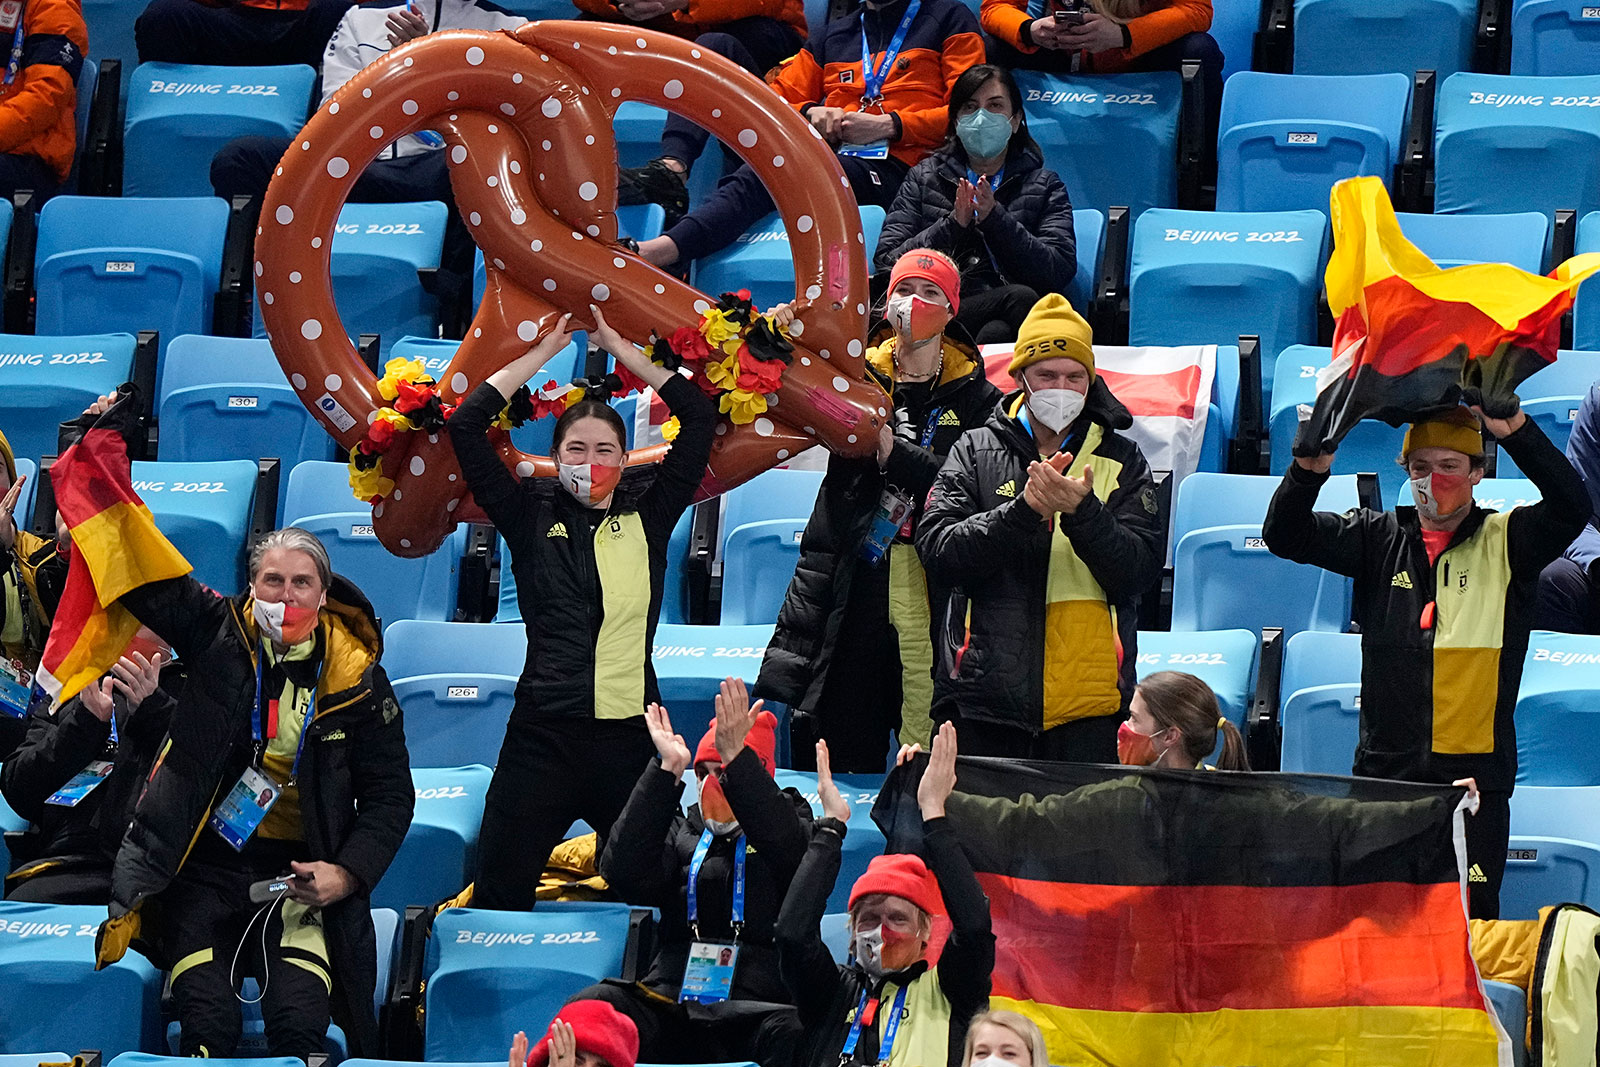 Just some German fans cheering on Nicole Schott with a giant pretzel. Nothing to see here.